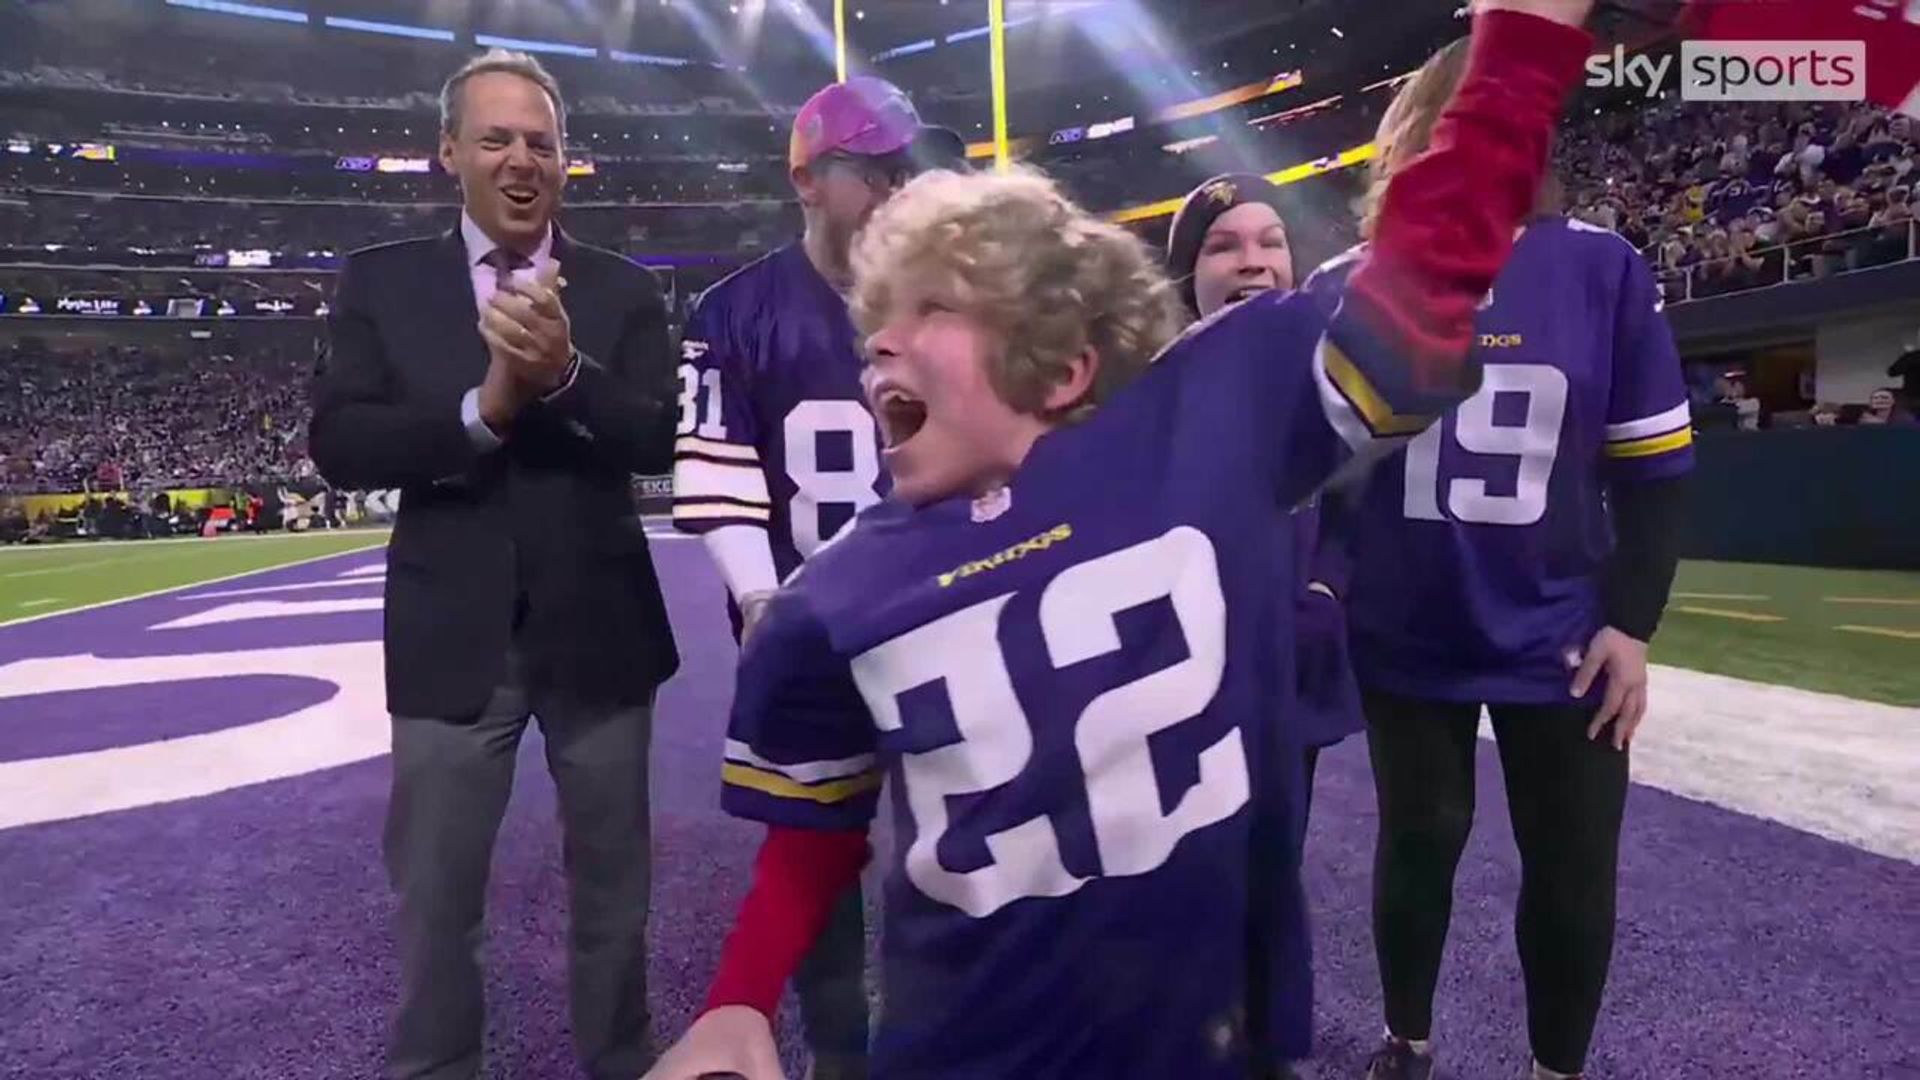 Young fan battling cancer gifted Super Bowl tickets